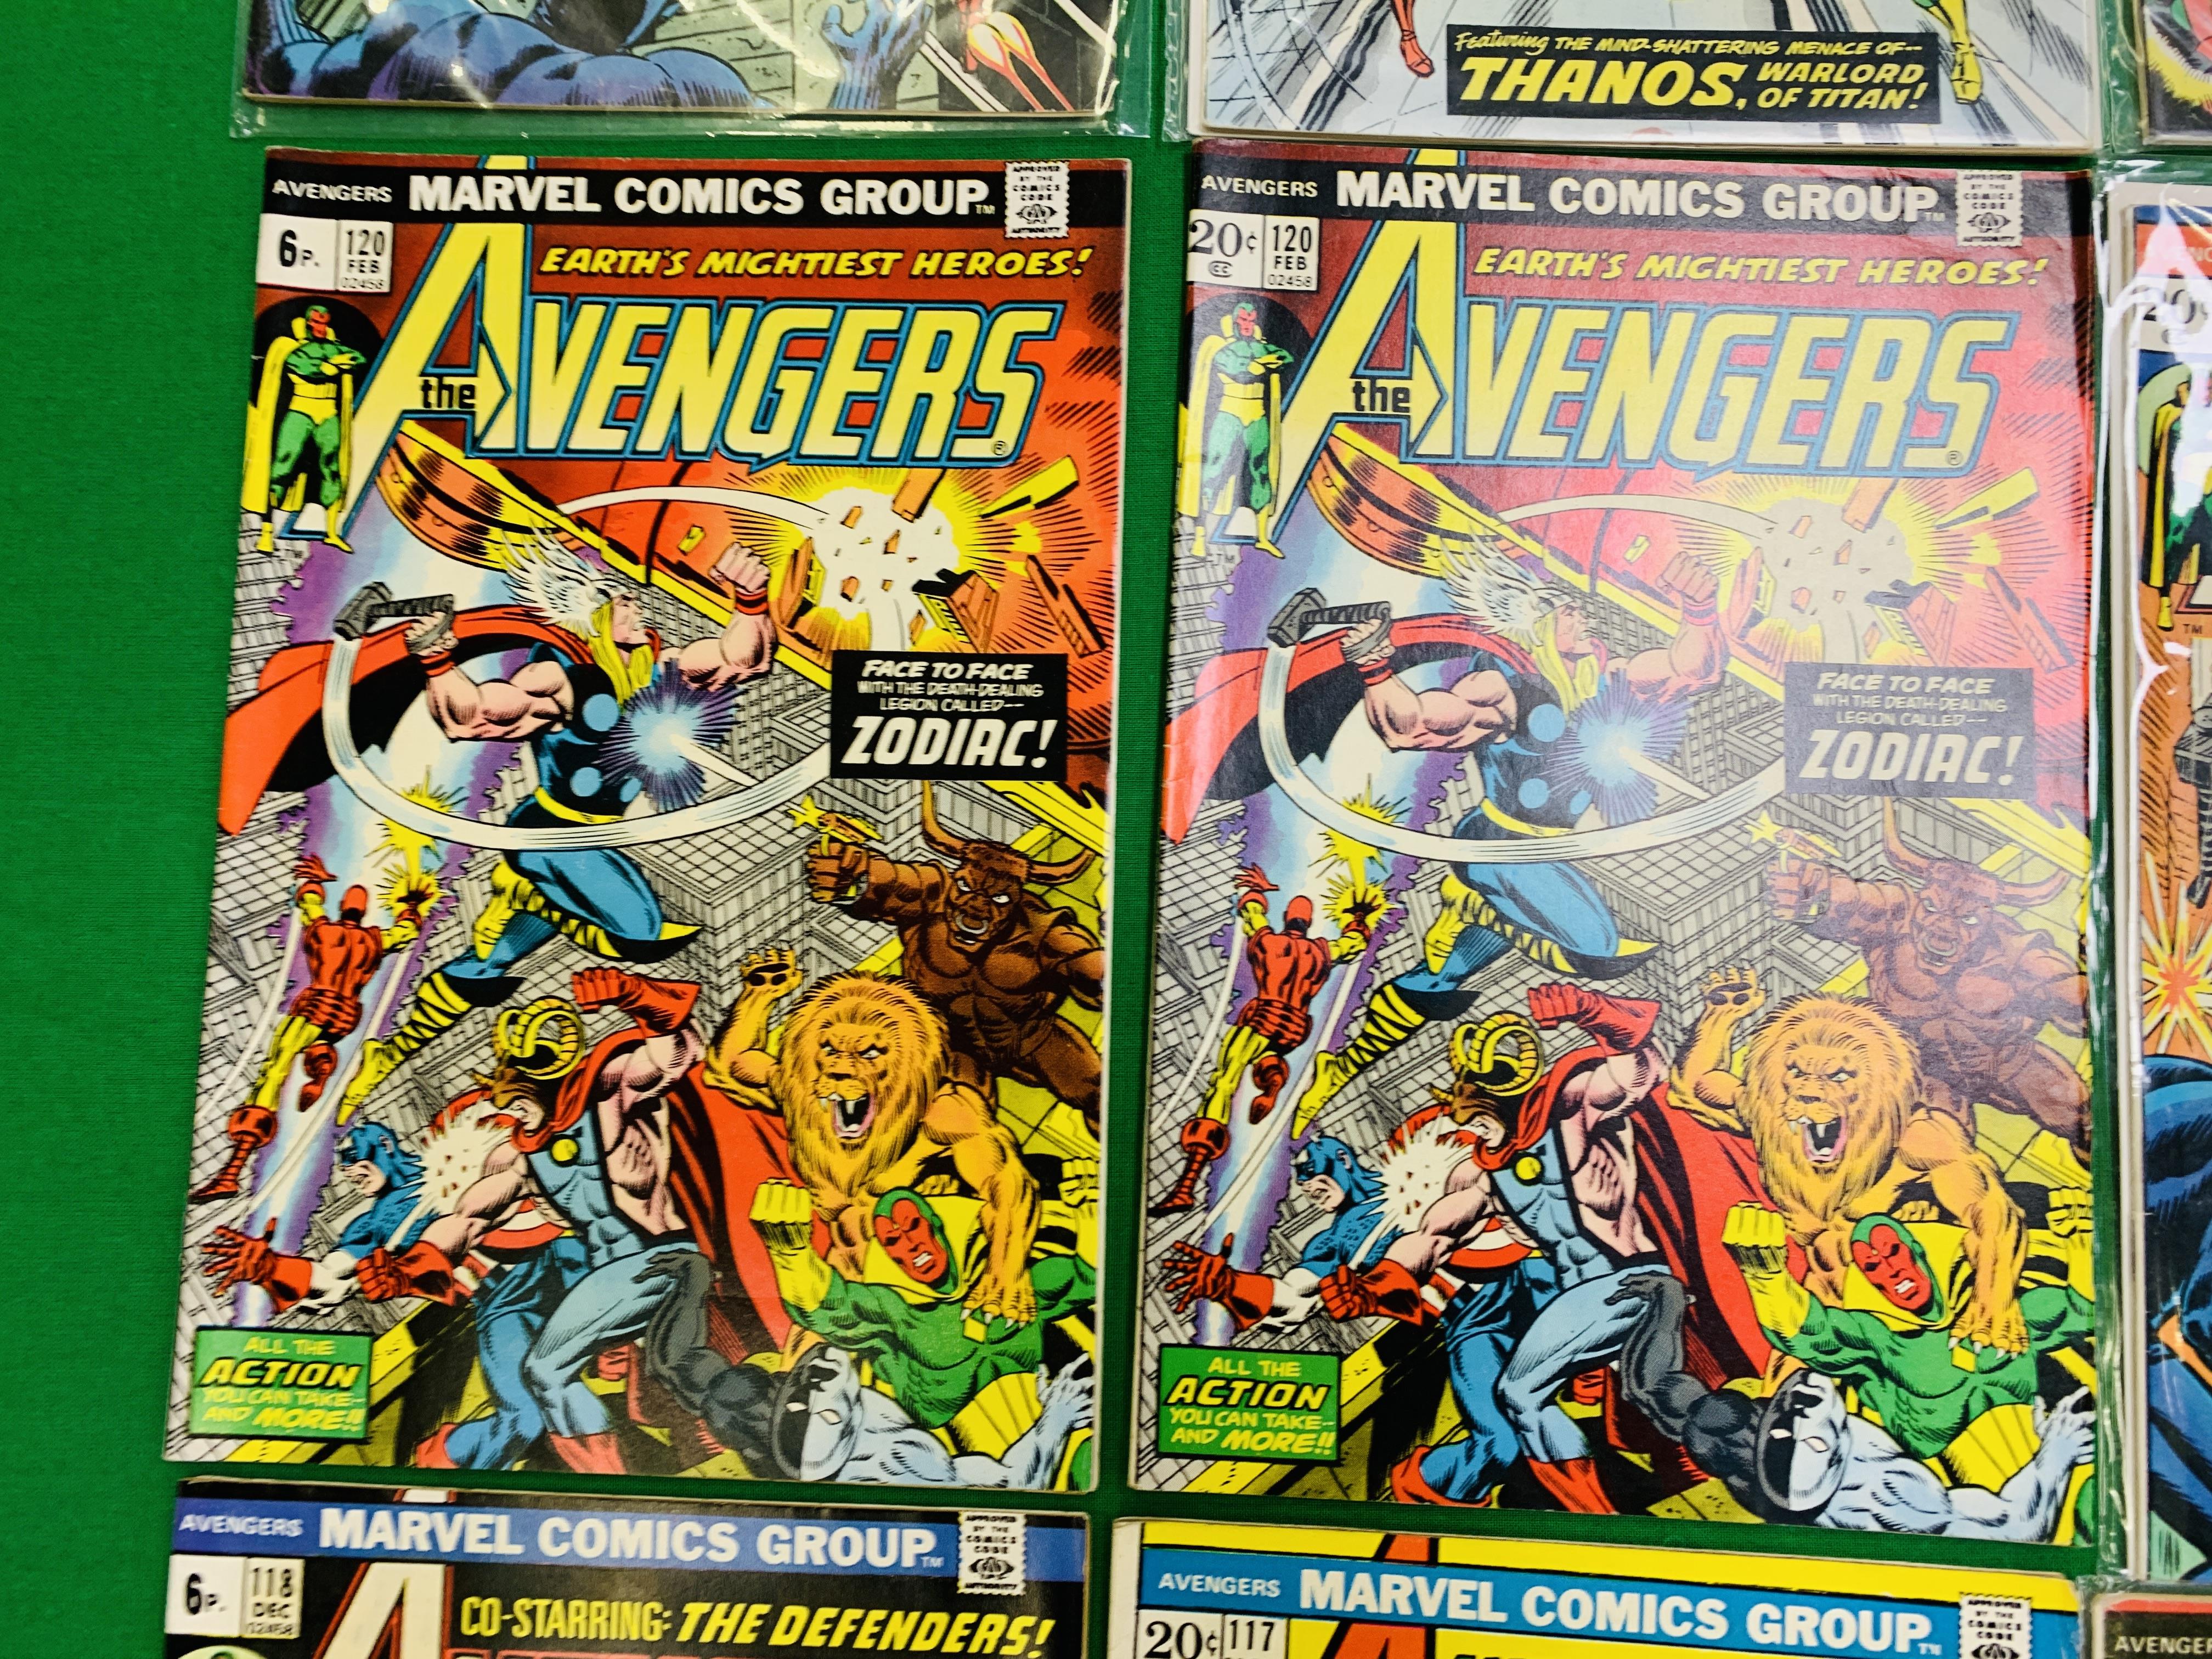 MARVEL COMICS THE AVENGERS NO. 101 - 299, MISSING ISSUES 103 AND 110. - Image 10 of 130